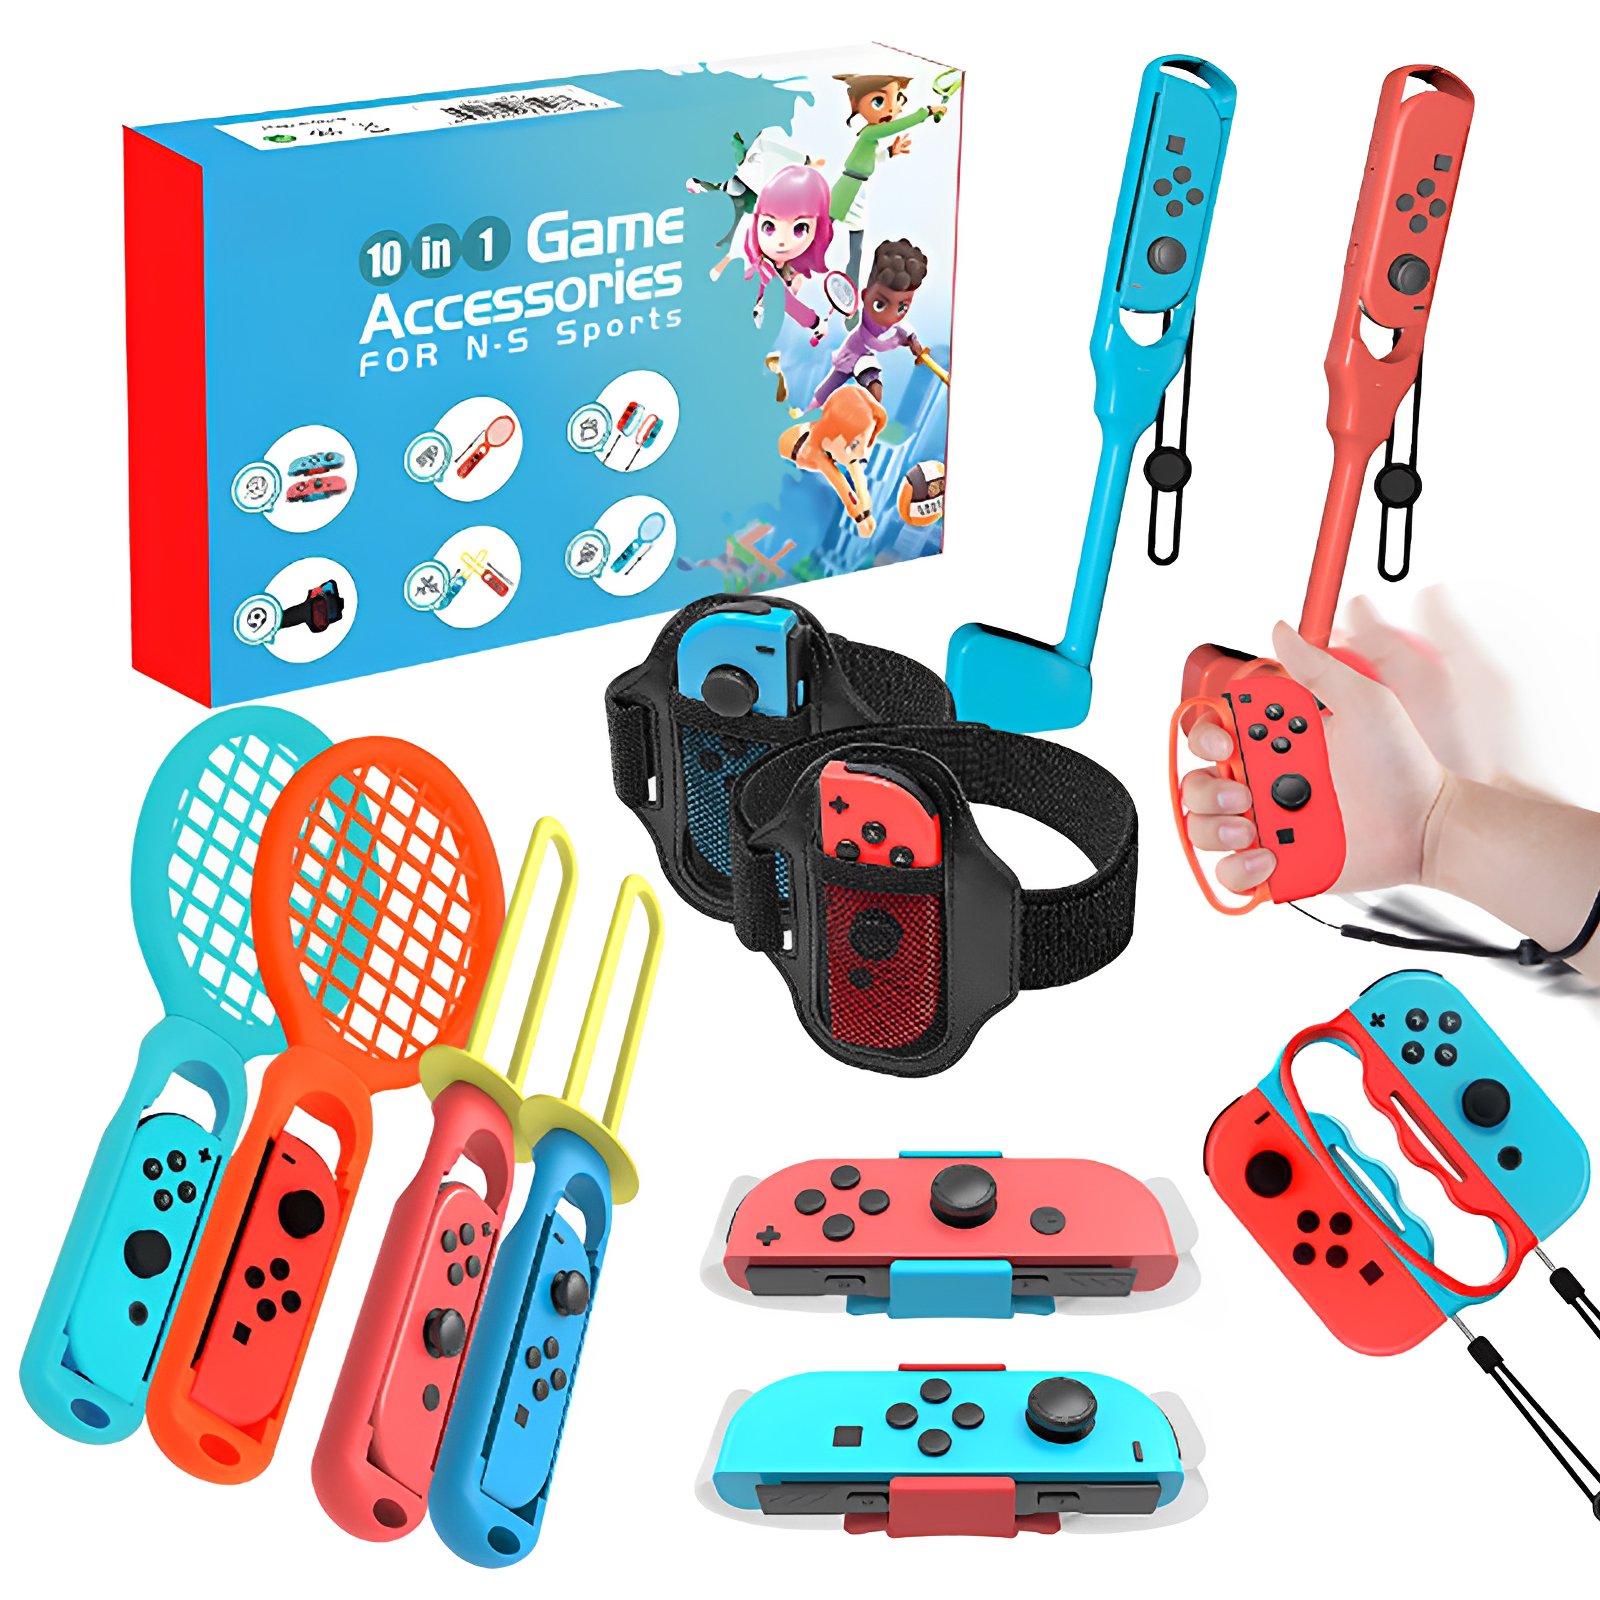 Switch Sports Accessories Bundle - 12 in 1 Family game Kit for Nintendo Switch and OLED Games